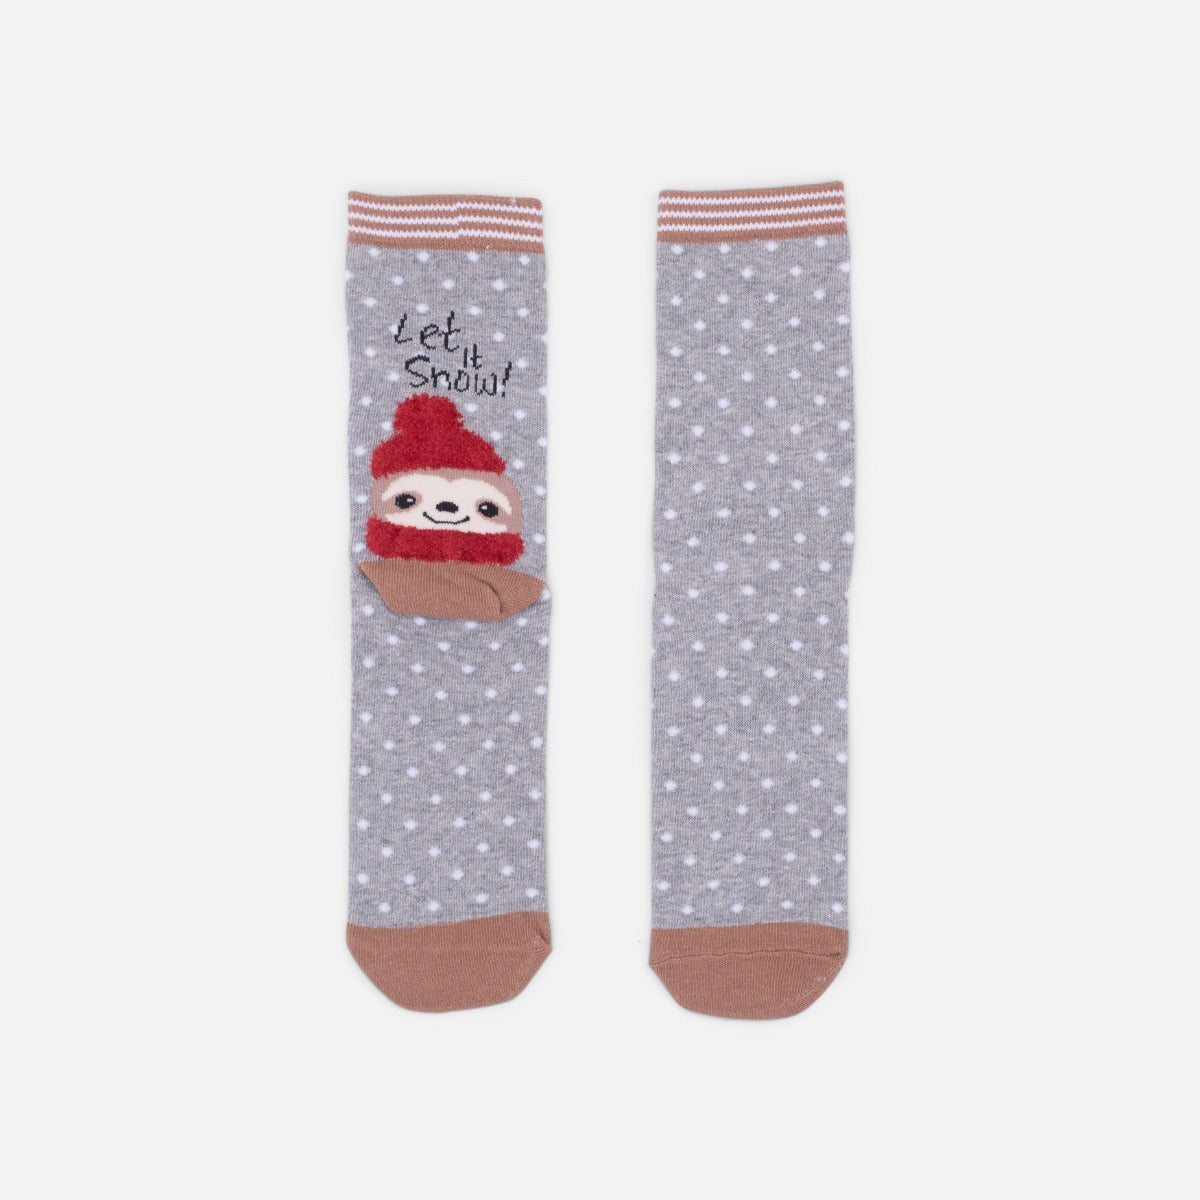 Grey socks with small white polka dots with winter sloth "let it snow"